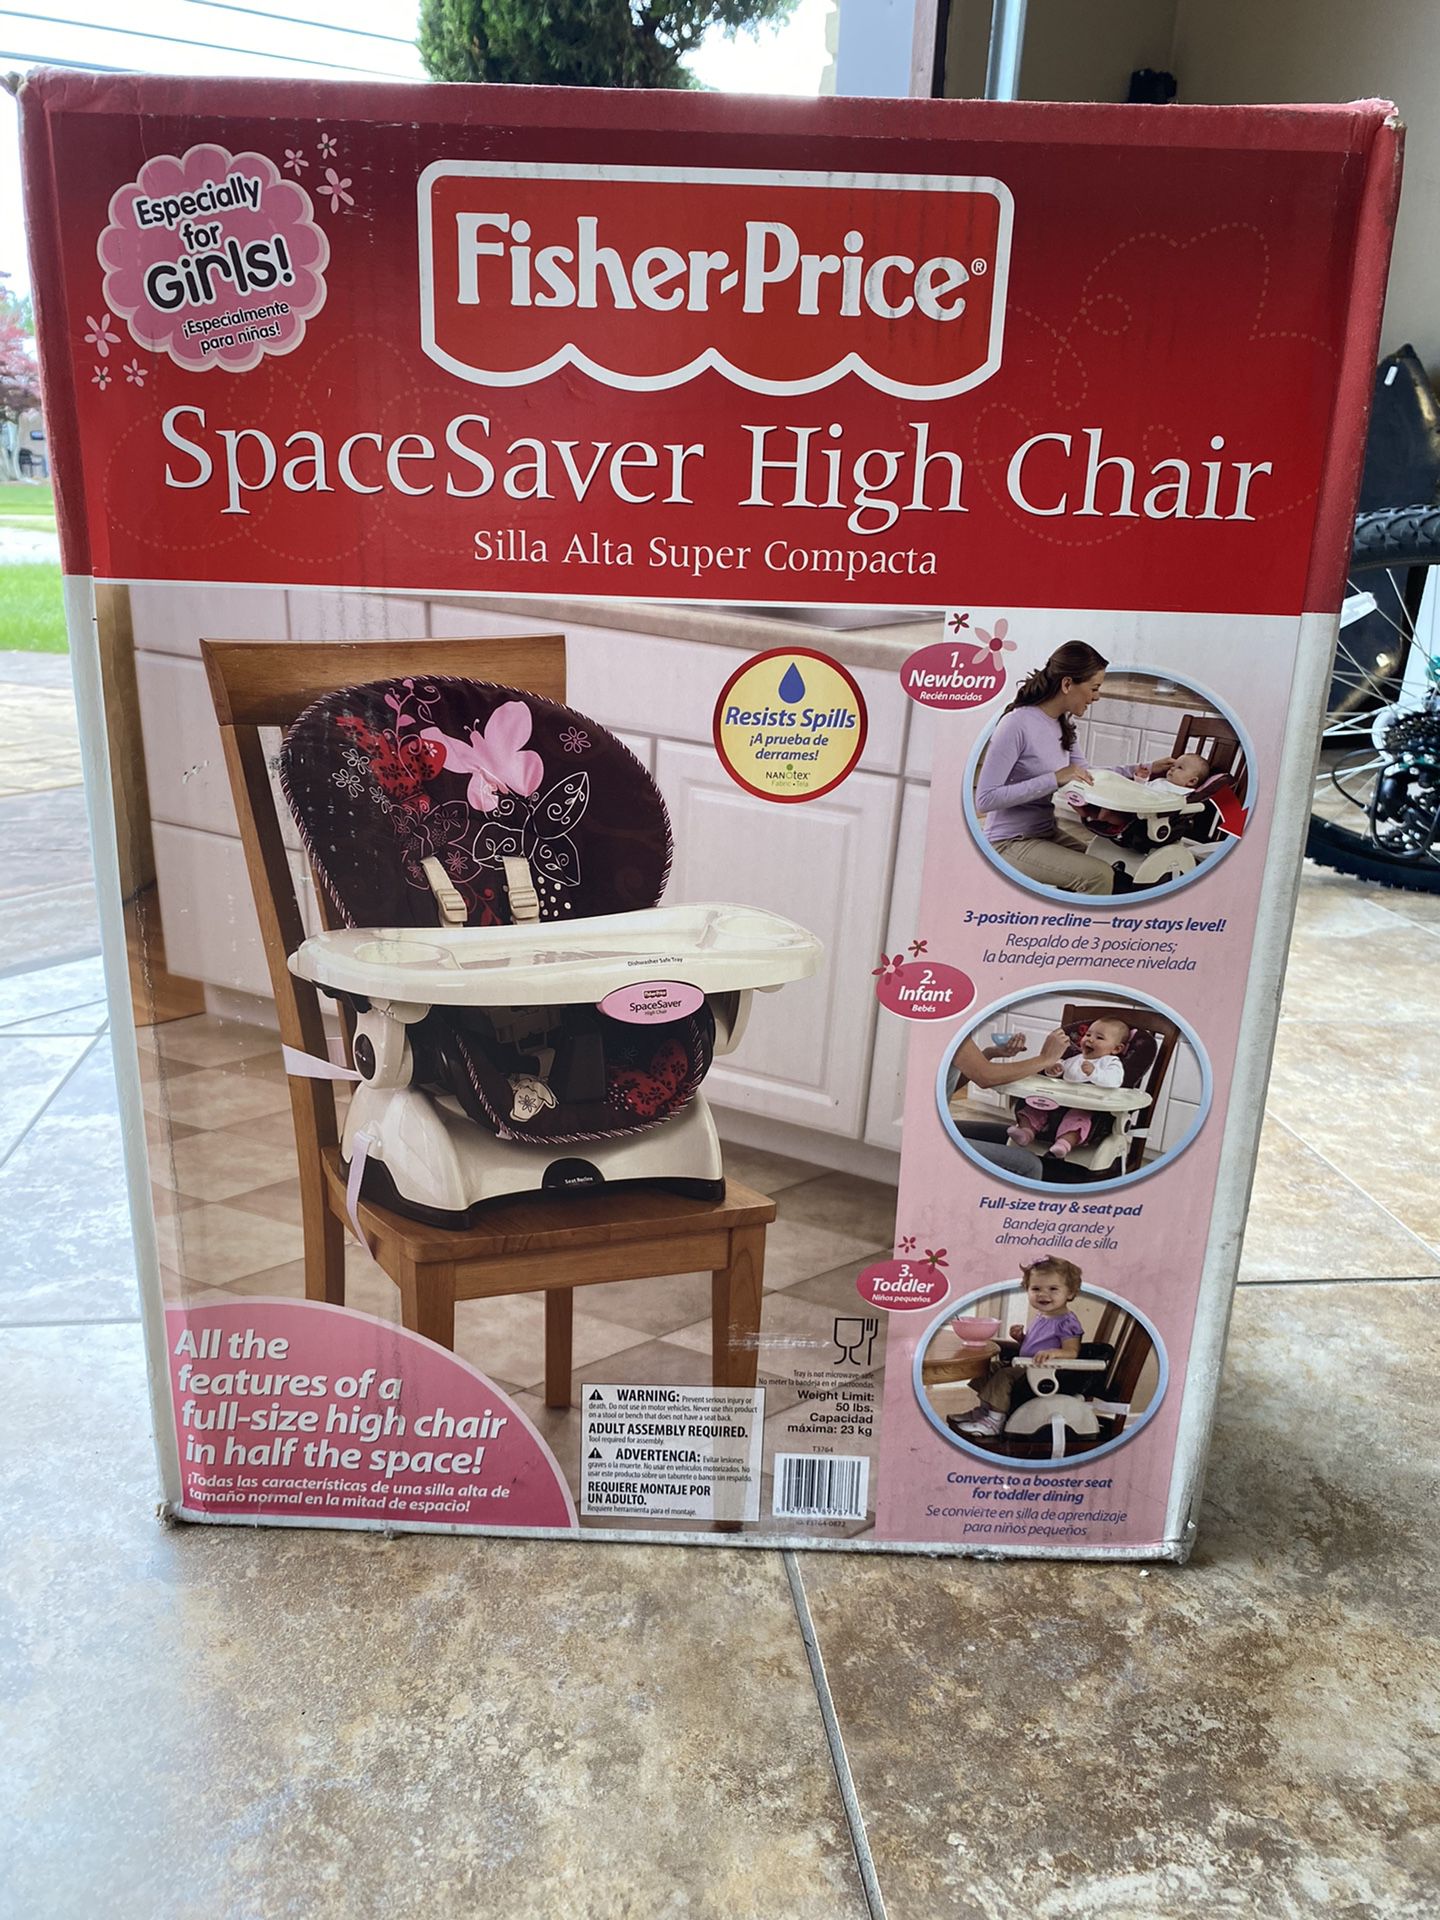 Still brand new in the box Fisher price SpaceSaver High Chair